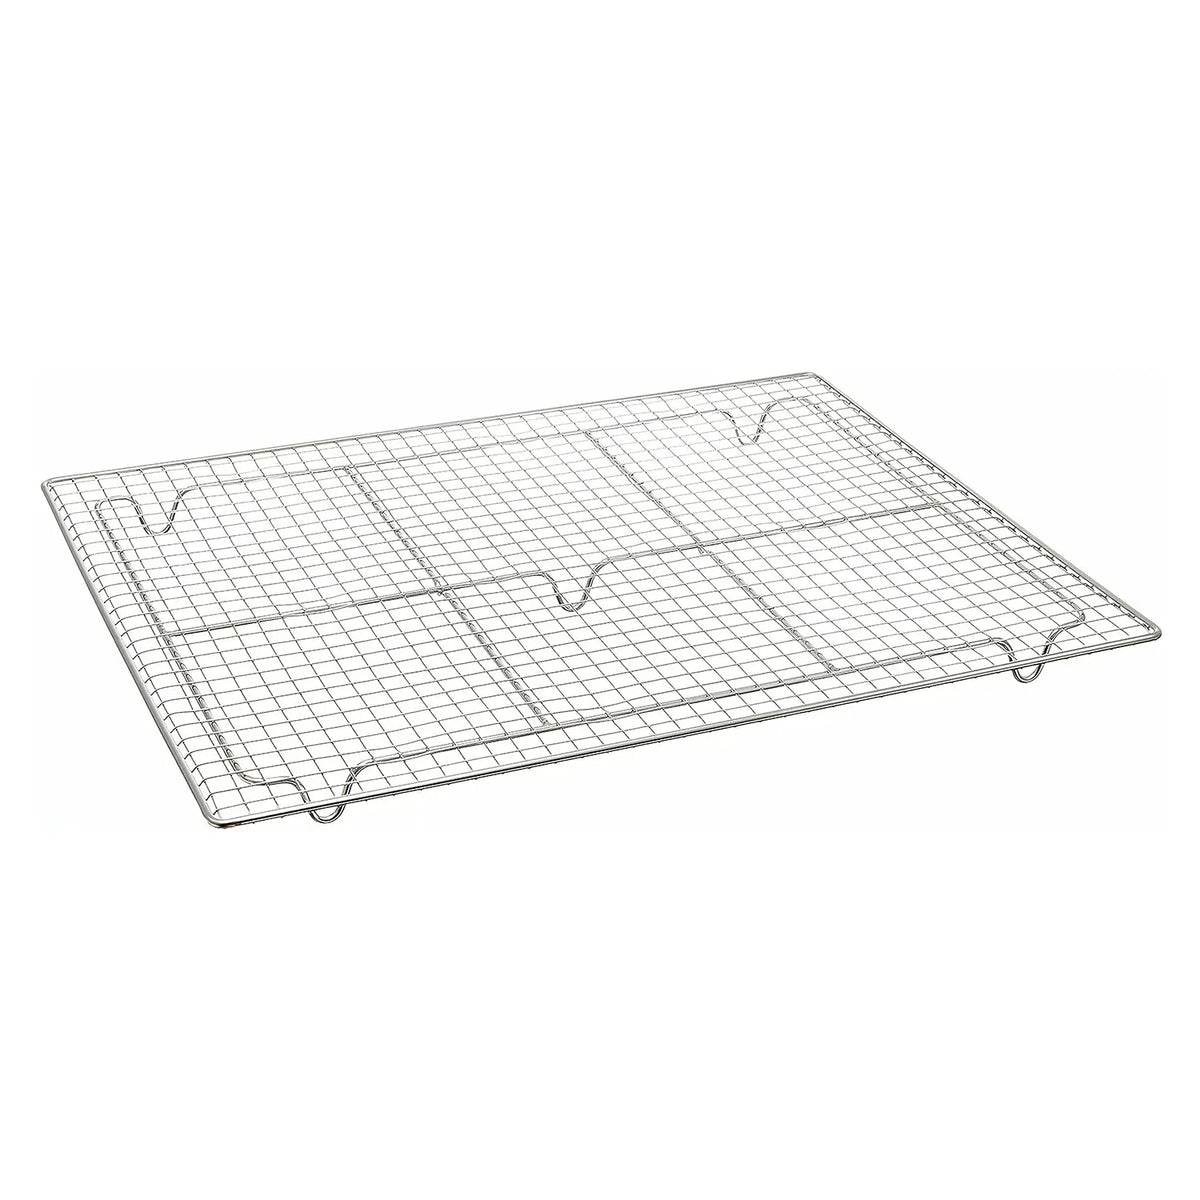 SUNCRAFT Patissiere Stainless Steel Square Cake Cooling Rack with Feet